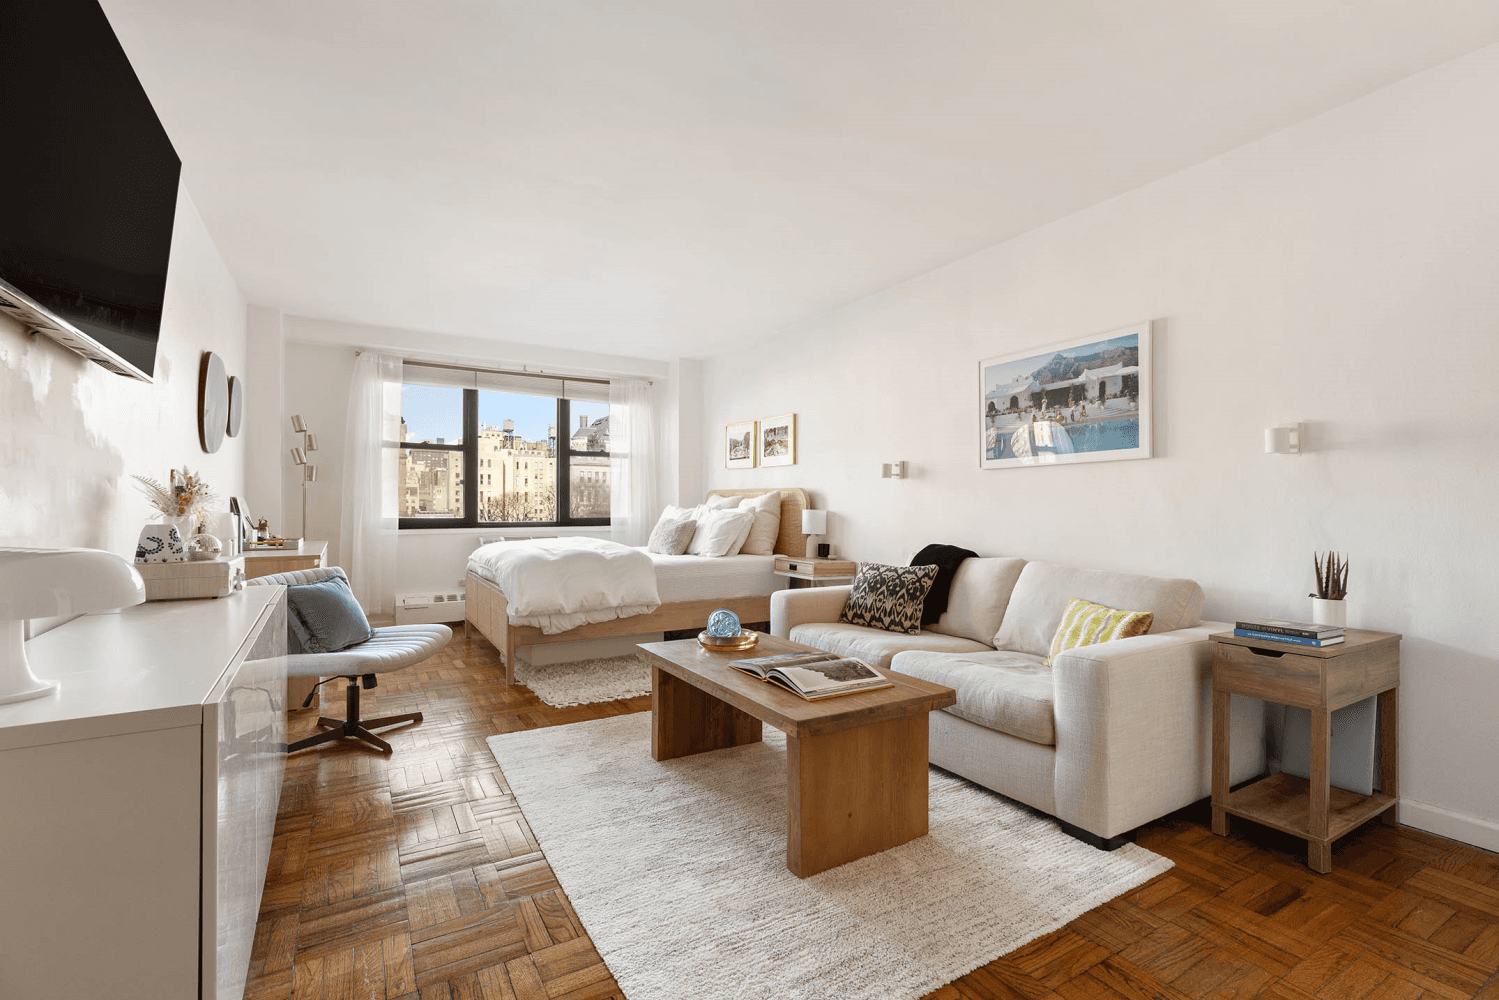 This Gramercy Park studio is ideally located offering you an abundance of parks, shopping, restaurants, movies, comedy clubs, live music venues, culture, and quick access to seven different trains 4 ...